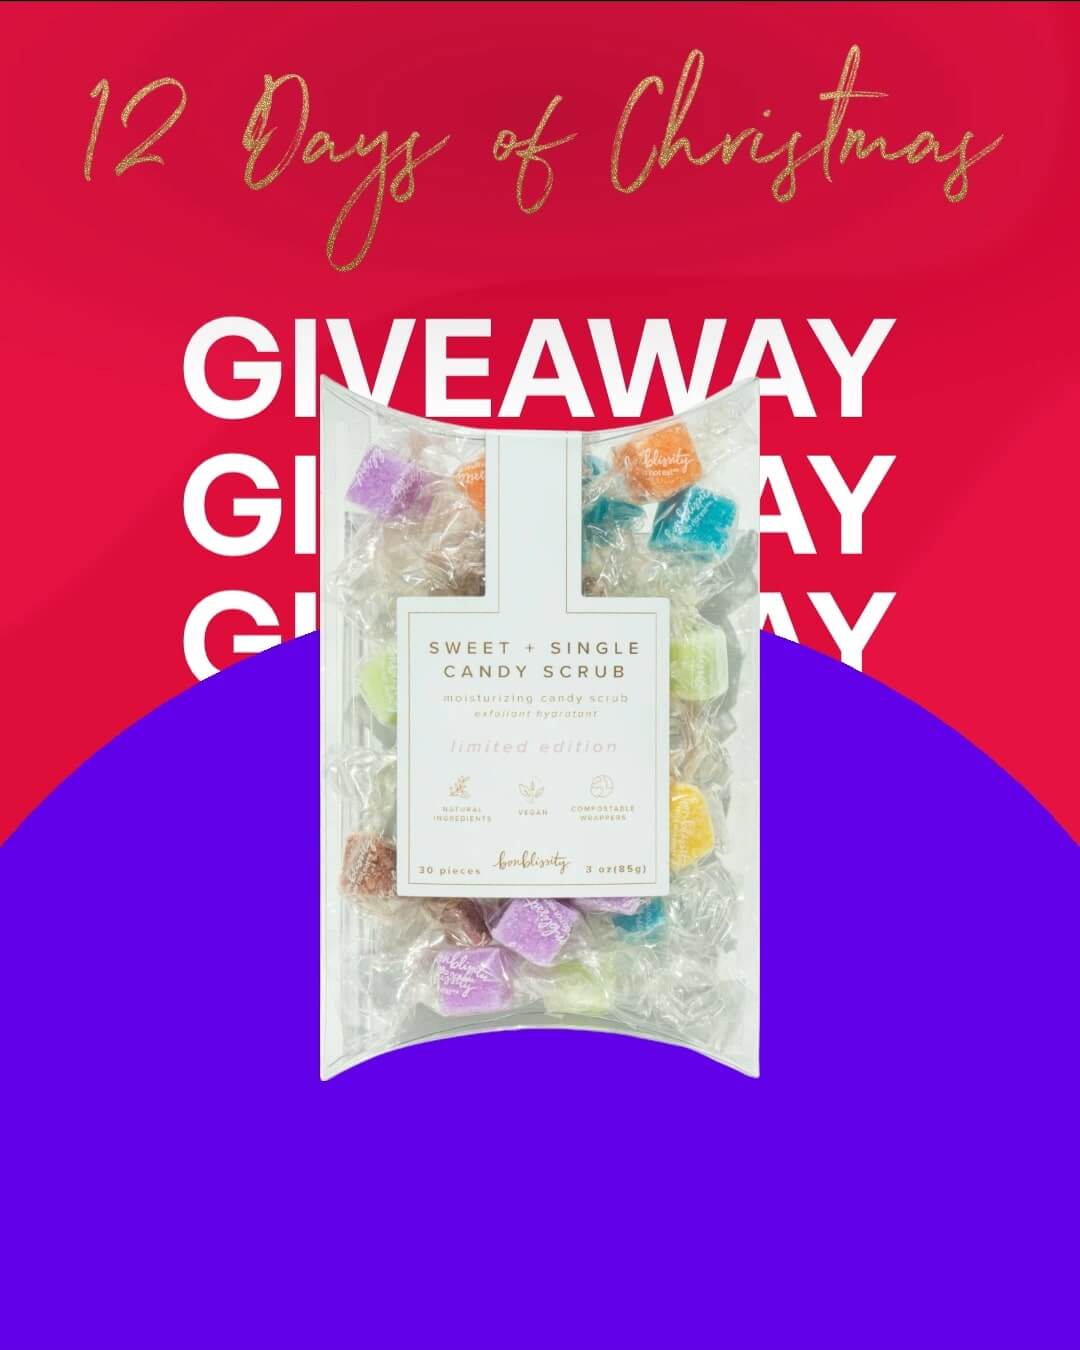 What you can win: Sweet+Single Candy Scrub from BonBlissity